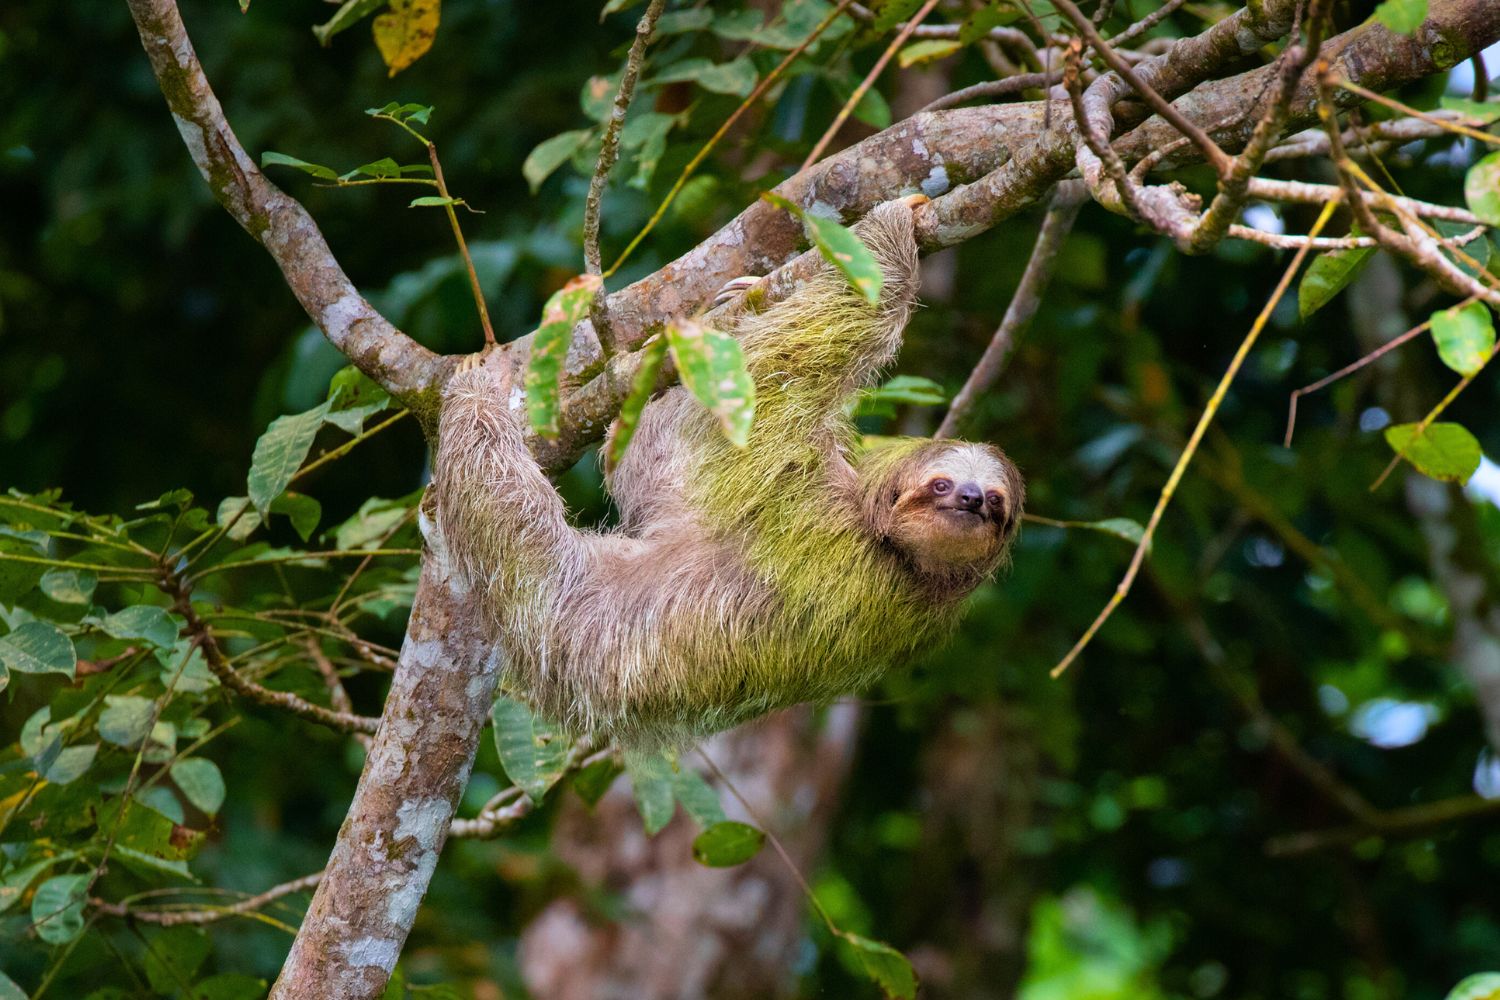 7. Some sloths can turn their heads all the way around!